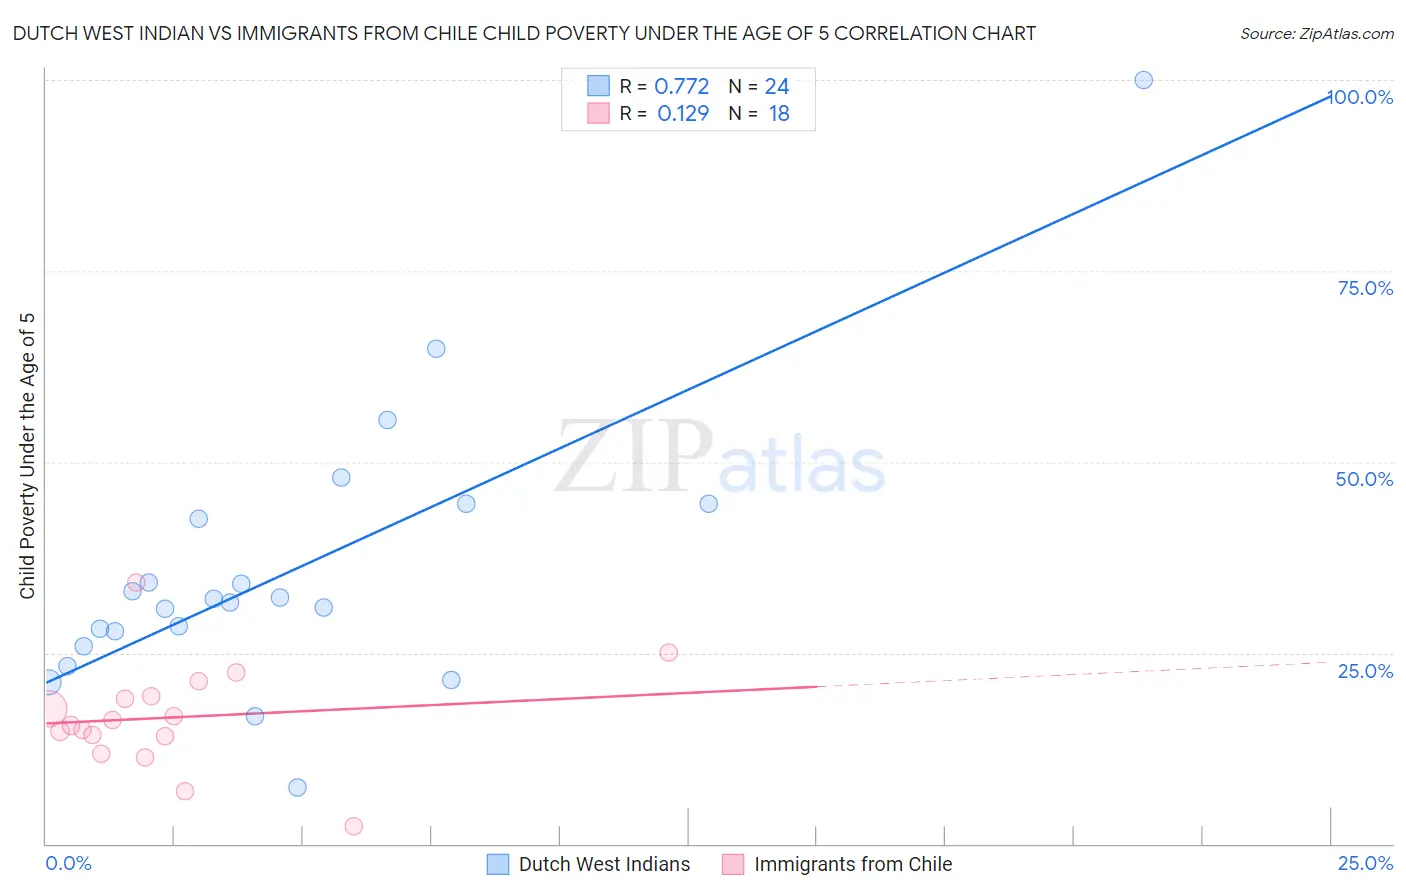 Dutch West Indian vs Immigrants from Chile Child Poverty Under the Age of 5